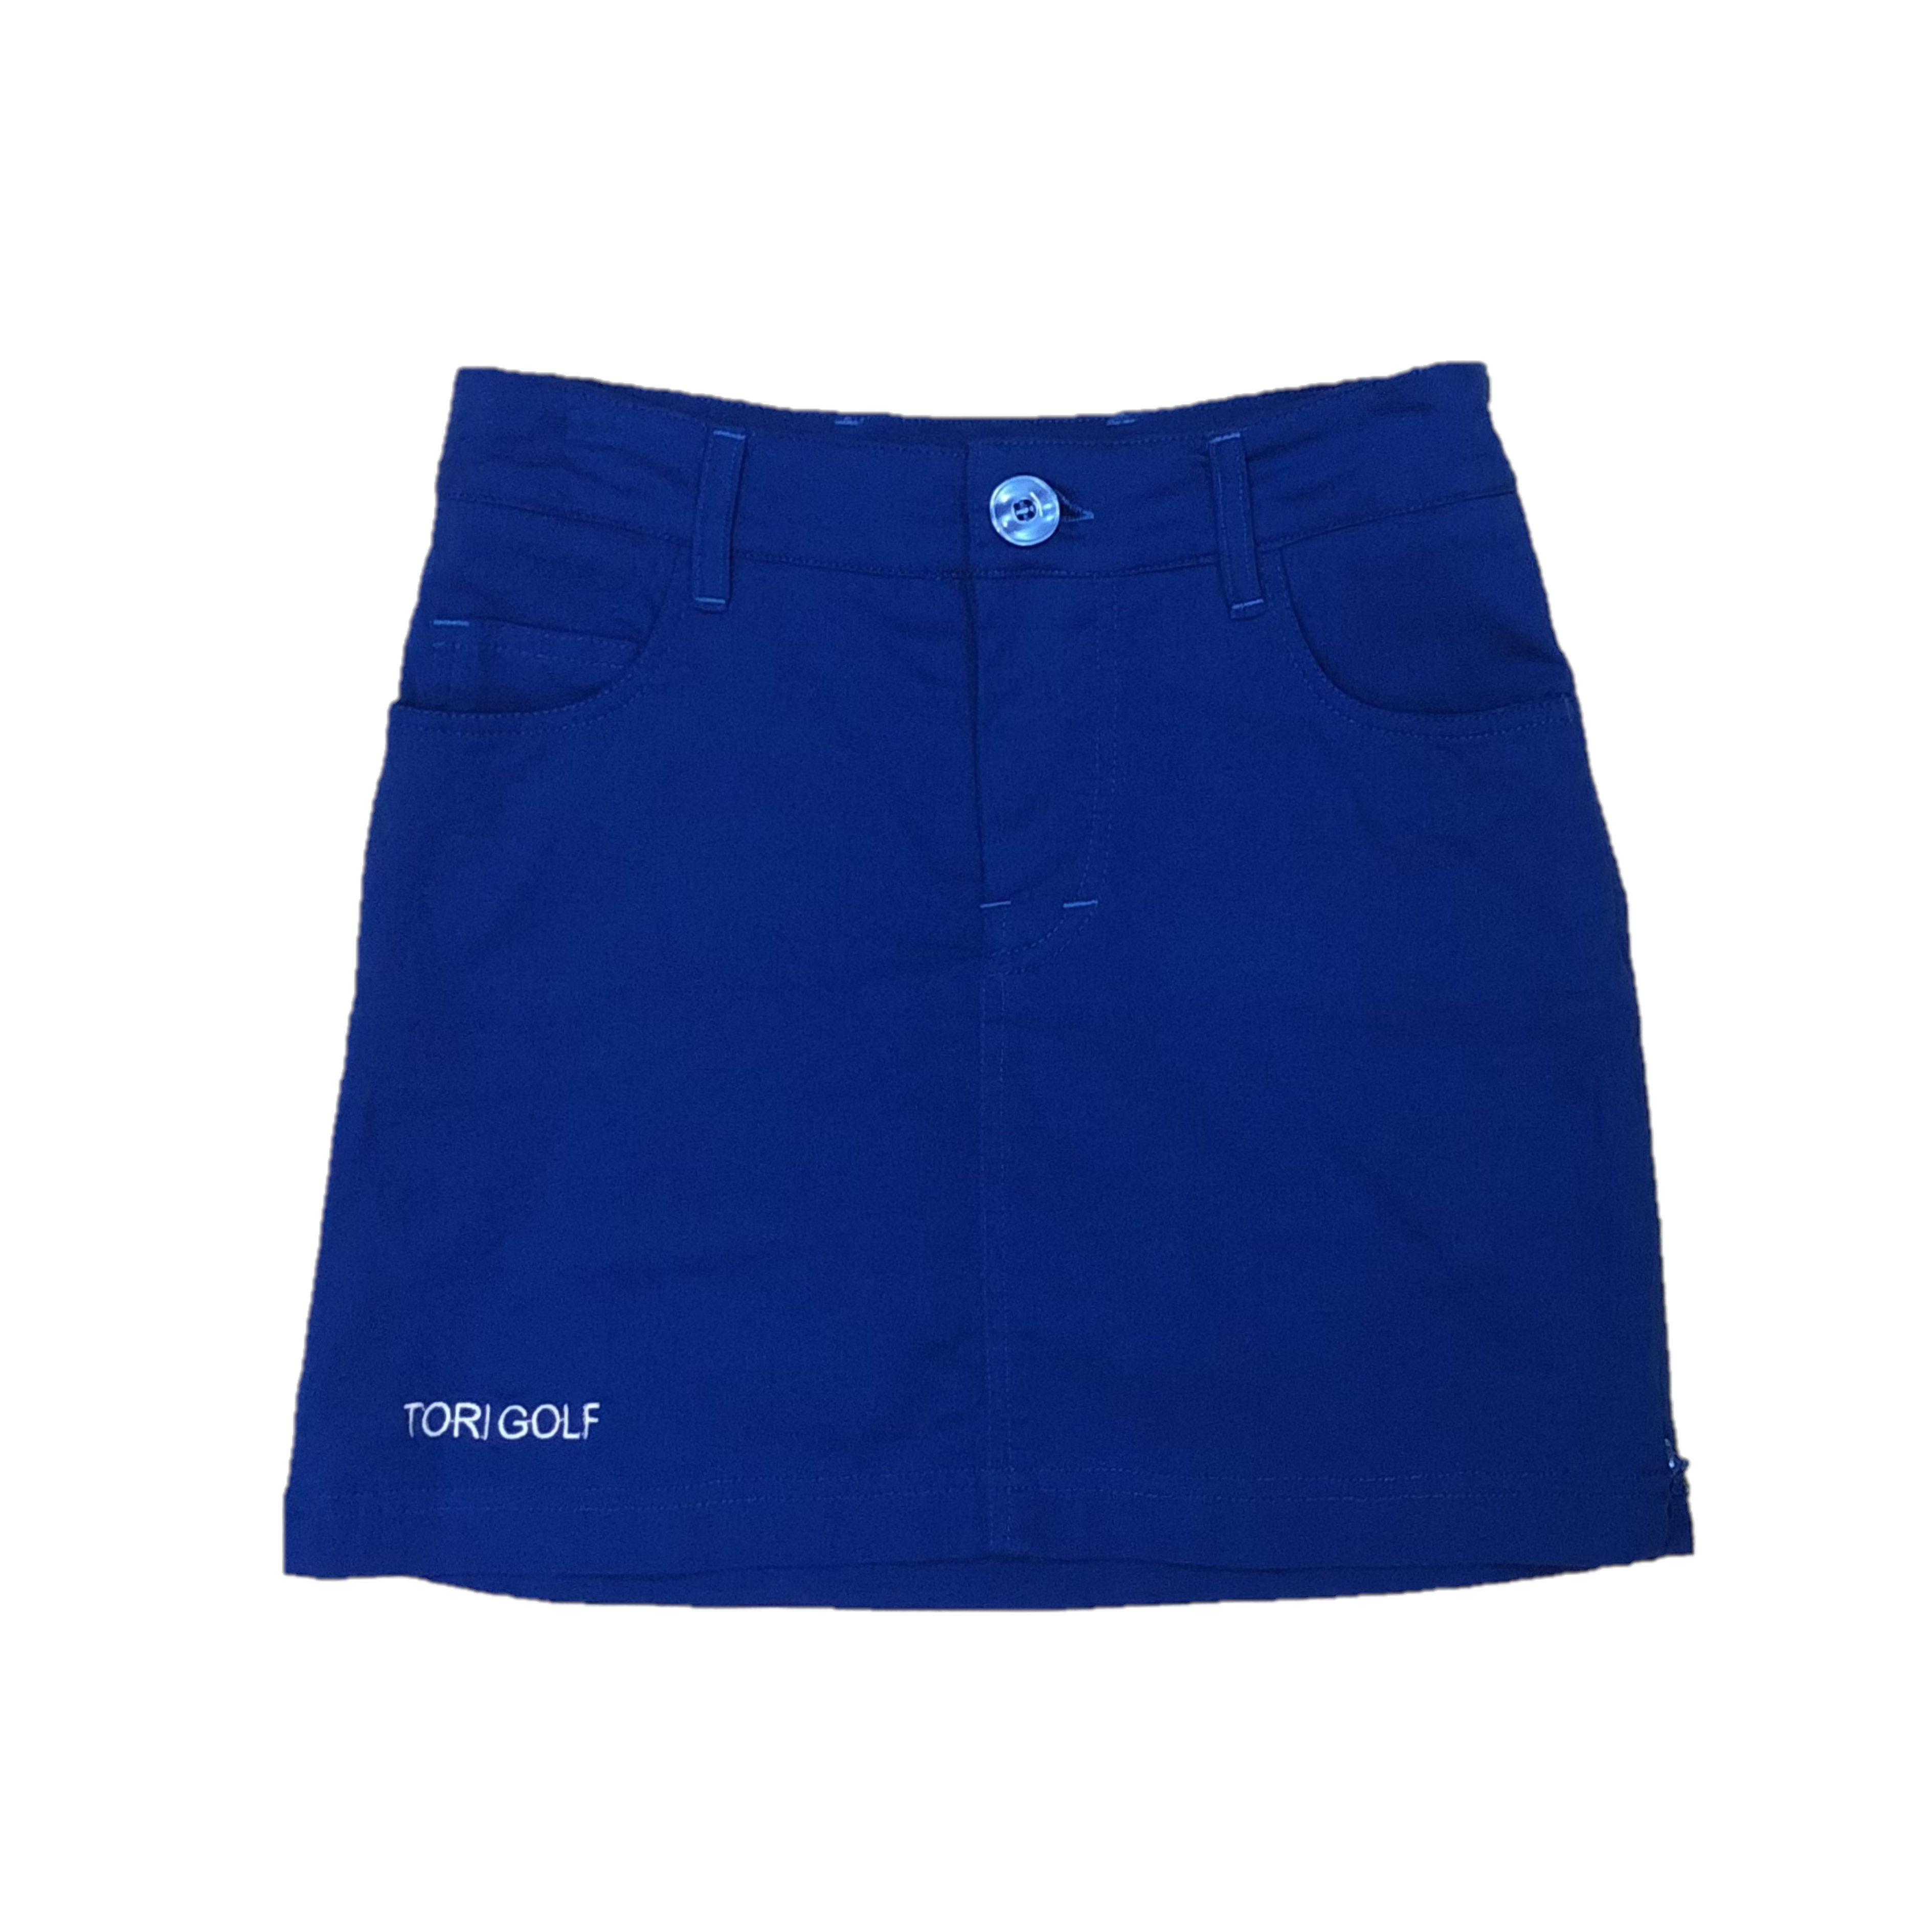 LS-021H || Skirt royale blue with 2 round front pockets,2 rear patch pockets front zipper and 2 zipped side vents